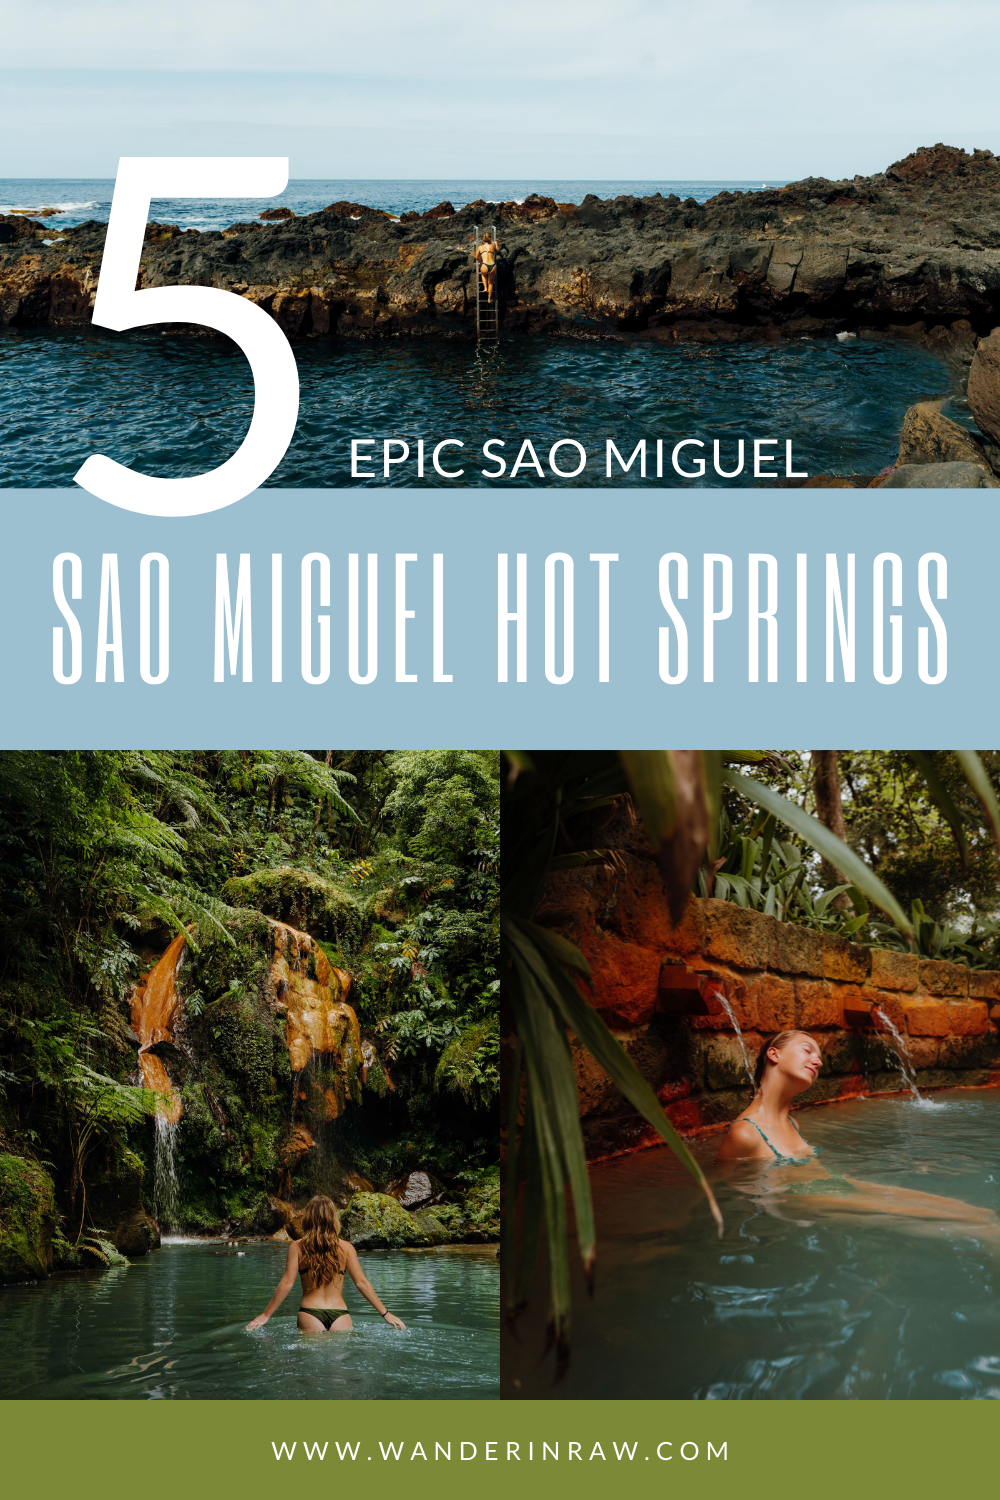 5 Epic Azores Hot Springs on São Miguel.